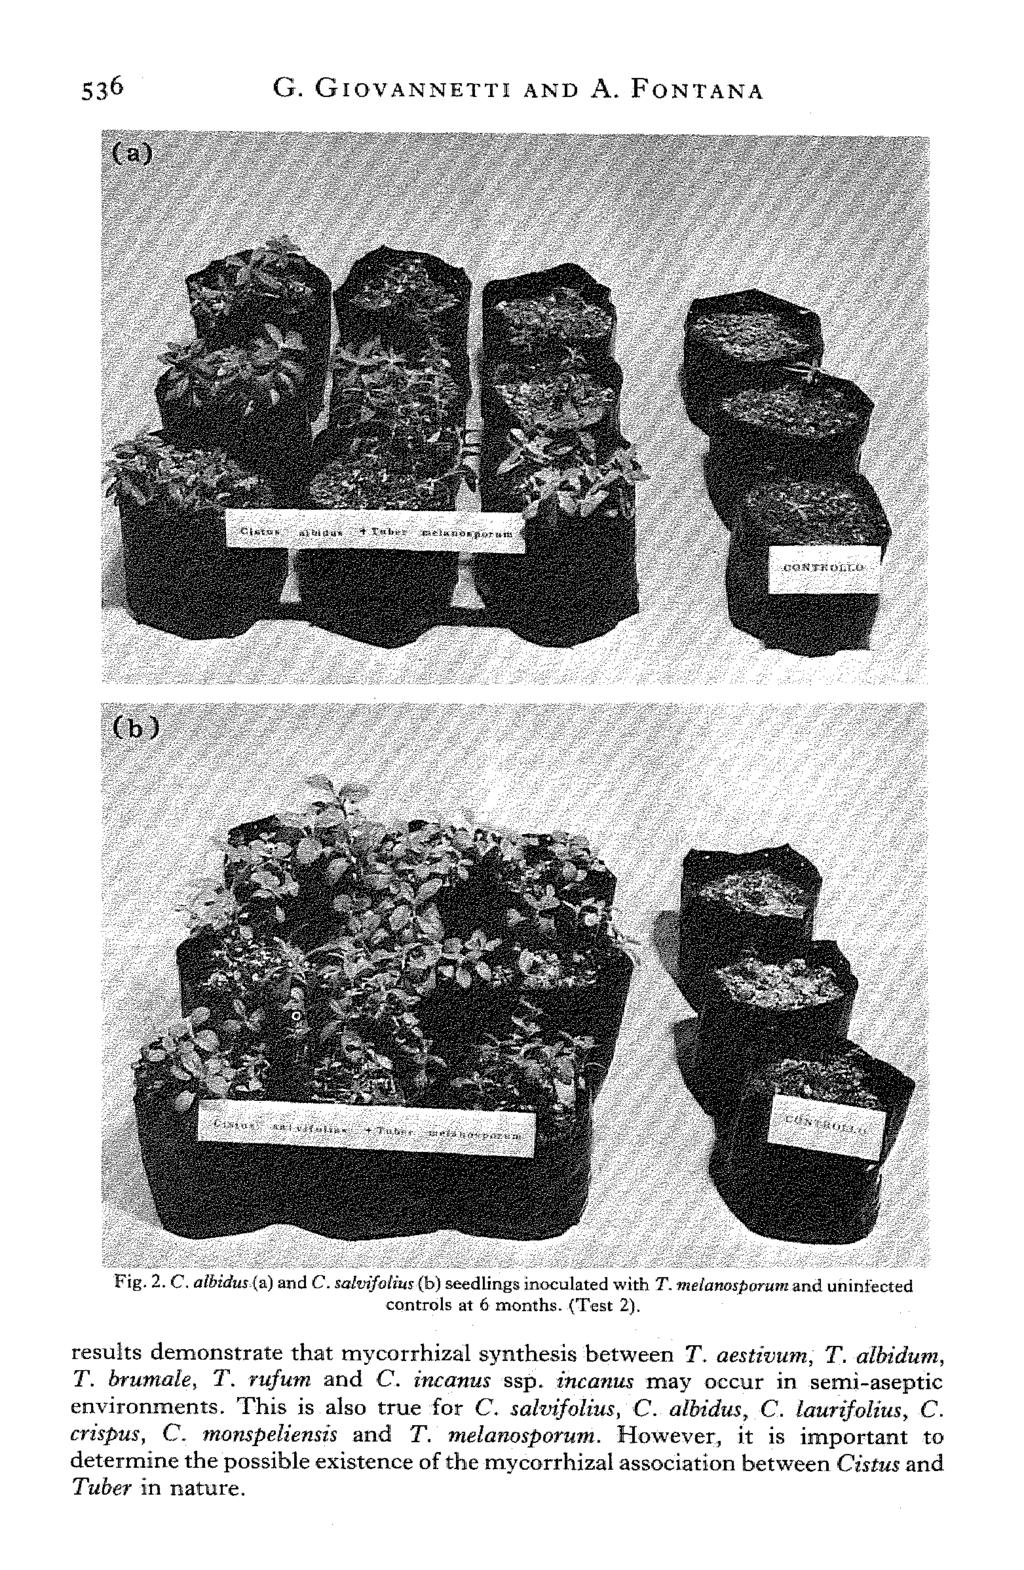 S36 G. GlOVANNETTI AND A. FONTANA (a) (b) Fig. 2. C. atbidus (a) and C. salvifolius (b) seedlings inoculated with T. melanosporum and uninfected controls at 6 months. (Test 2).